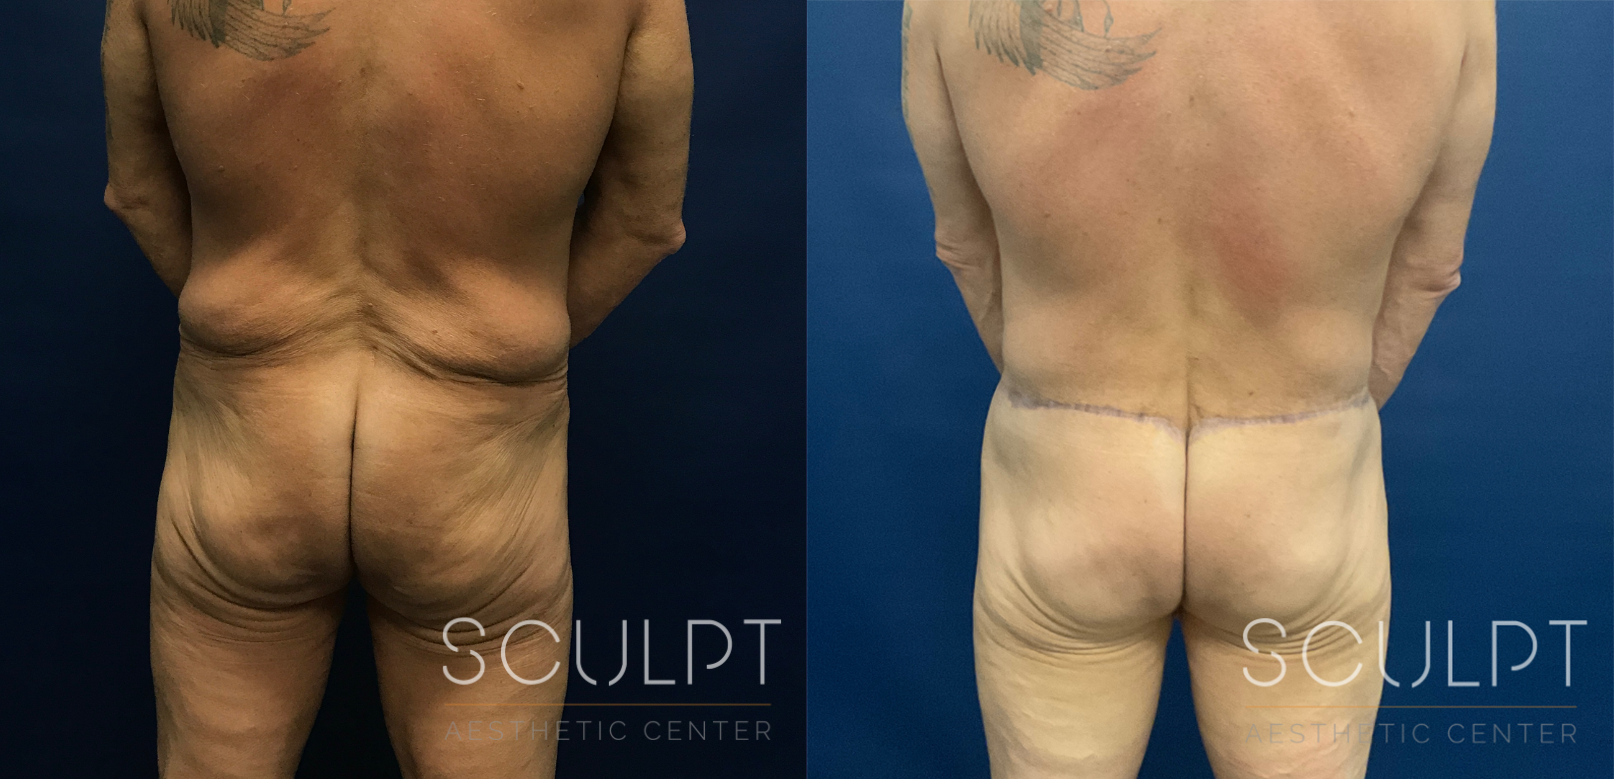 After Weight Loss Fitness Surgery Before and After Photo by Sculpt Aesthetic Center in Frisco, TX